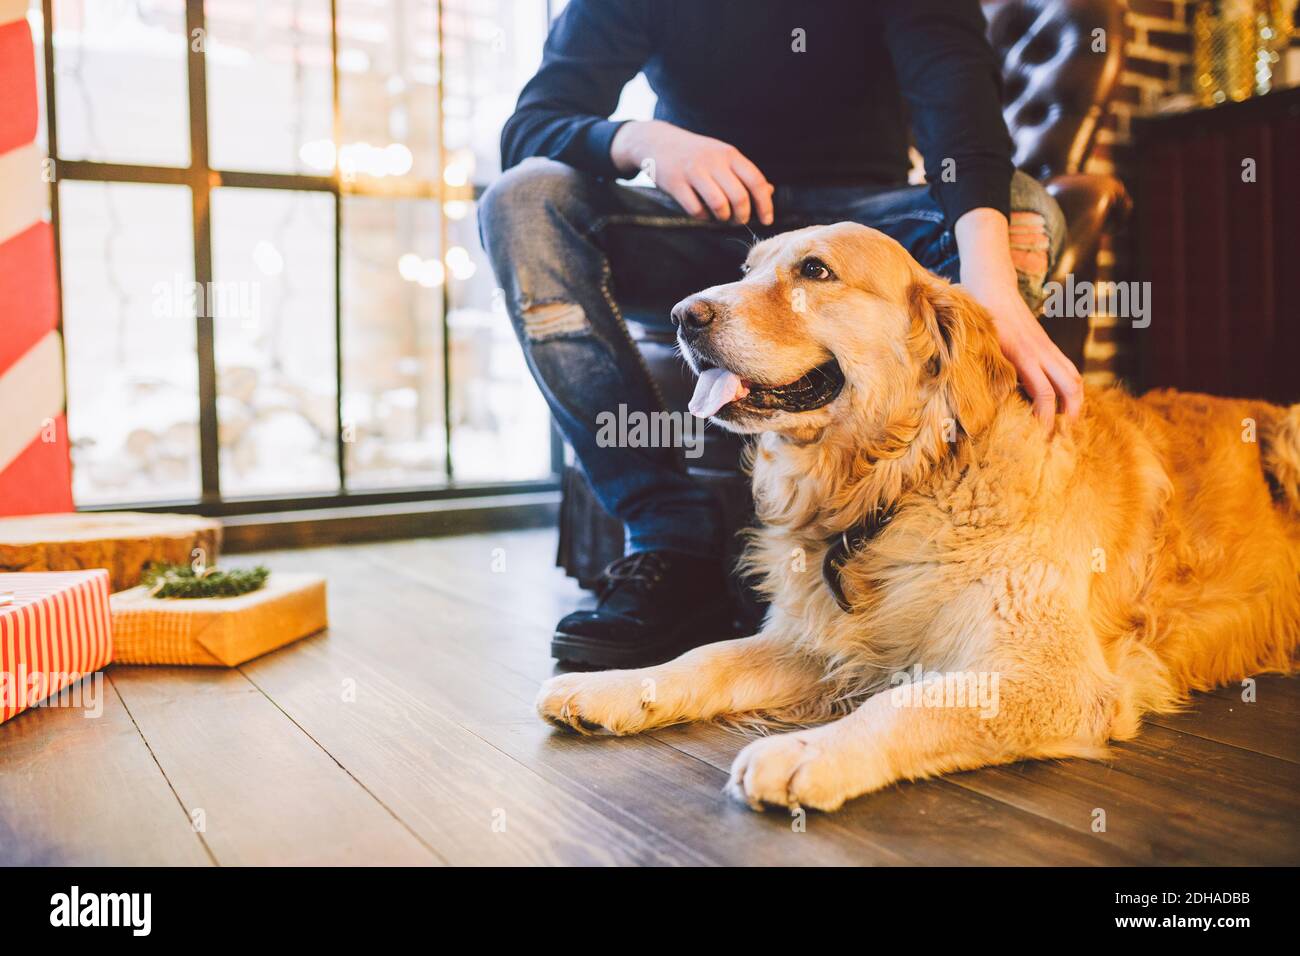 Adult Dog A Golden Retriever Abrador Lies Next To The Owner S Legs Of A Male Breeder In The Interior Of House On A Wooden Floor Stock Photo Alamy